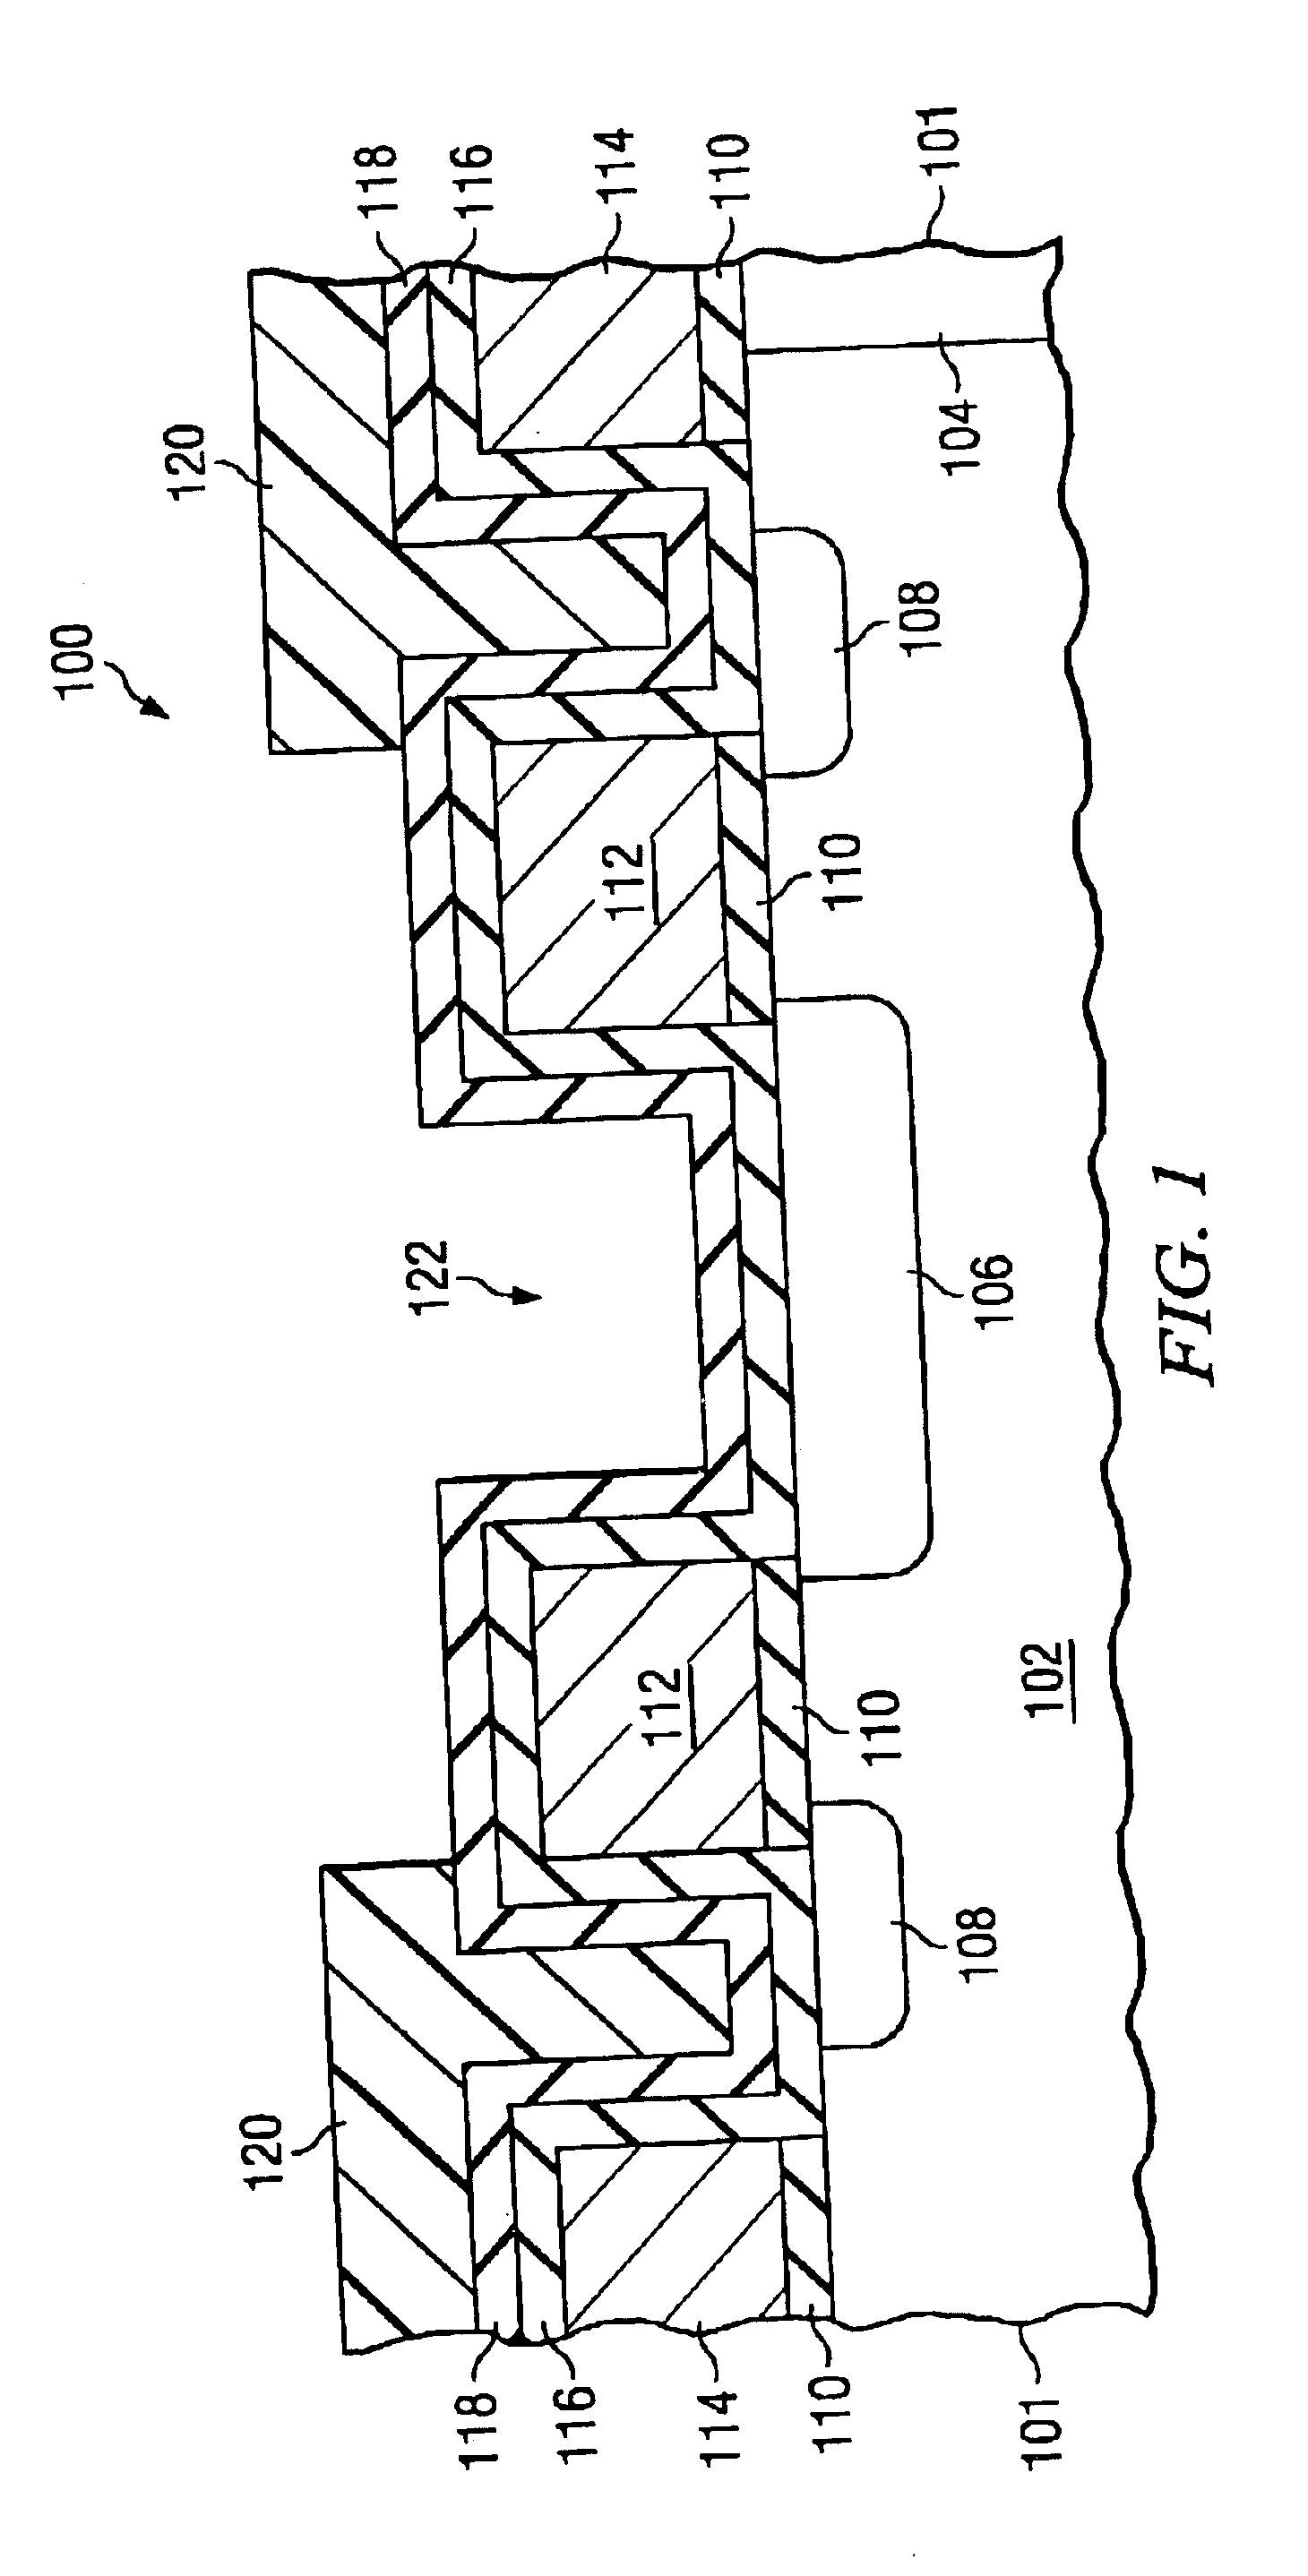 Selective silicidation scheme for memory devices